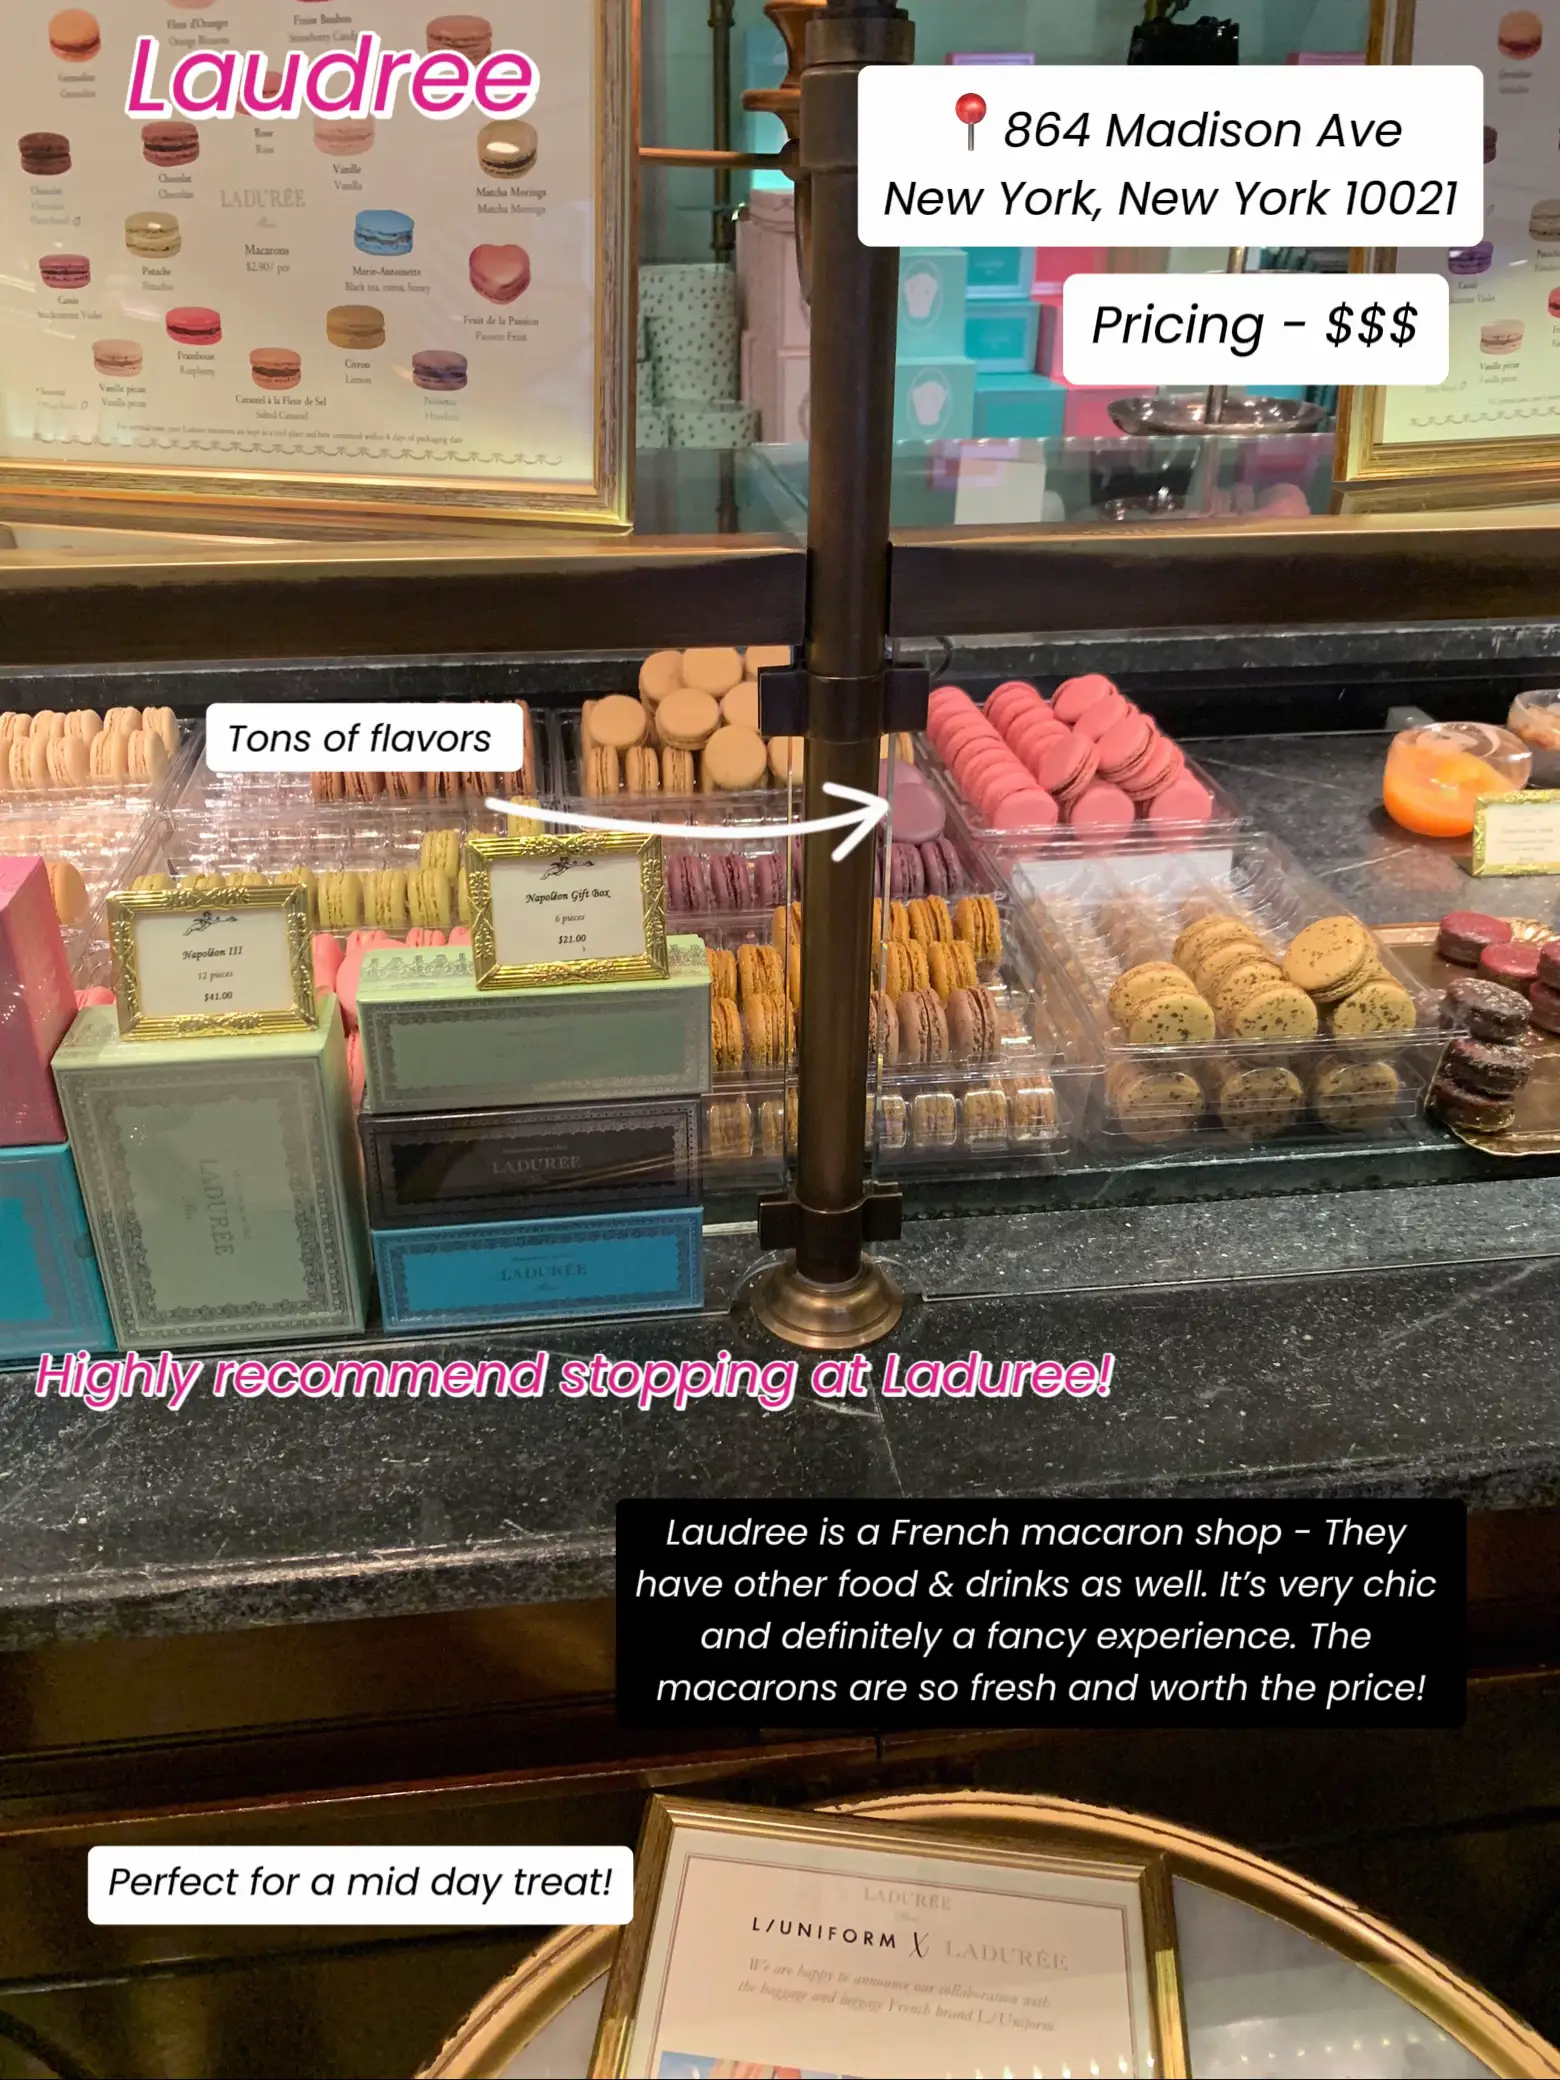  A display of macarons and other desserts at a storefront